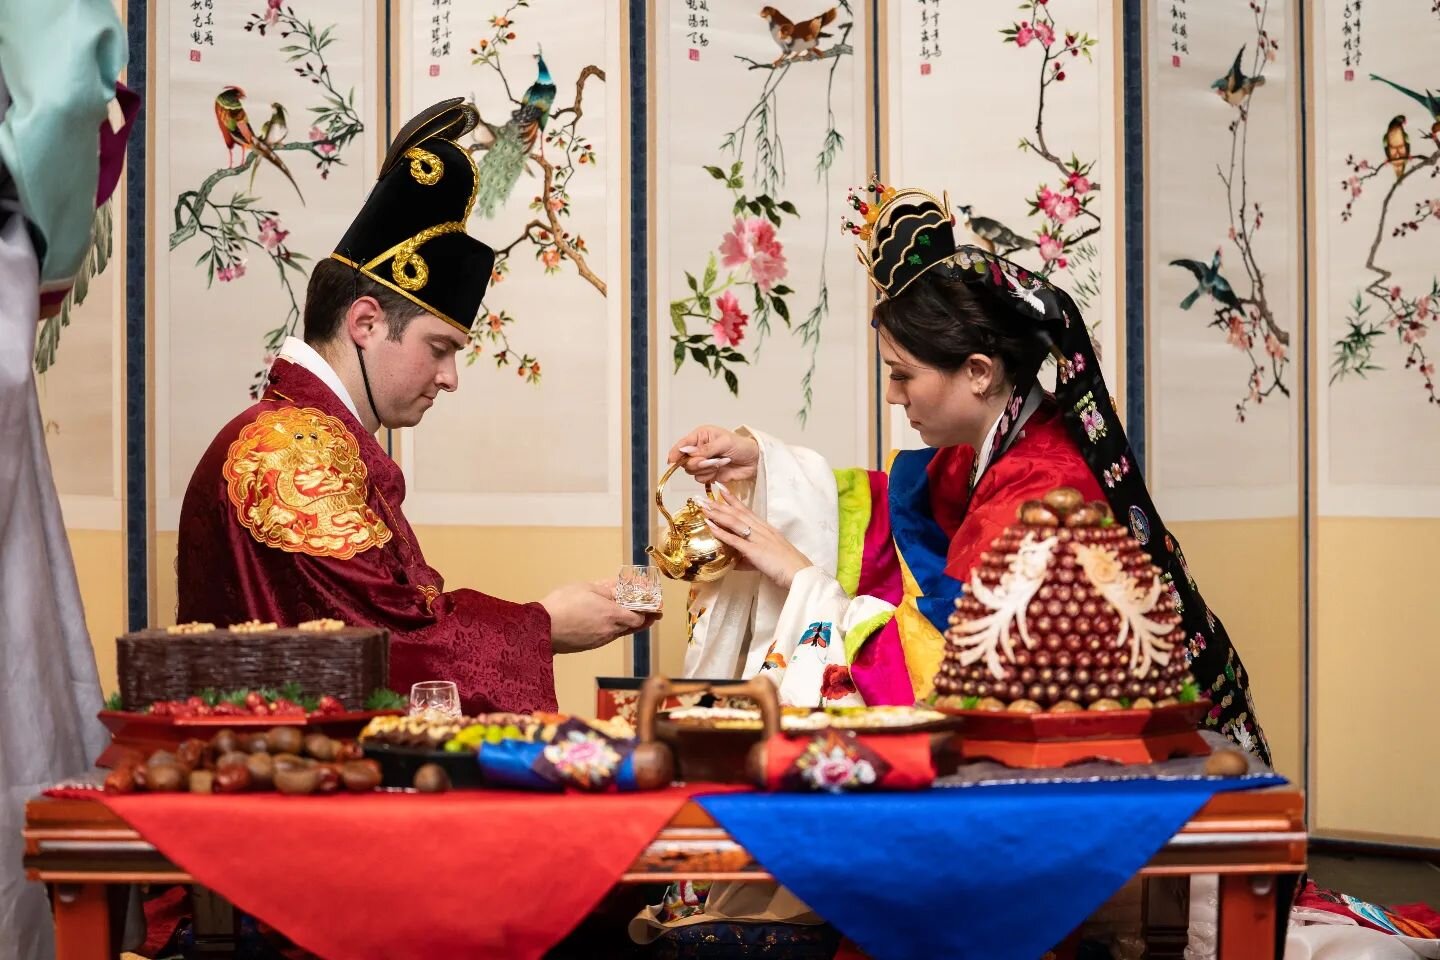 Julia and Copeland had two beautiful nights of wedding celebrations! Night one was the Paebaek ceremony, a Korean wedding tradition to pay respects to their families with a tea ceremony.

One part of the night had family throwing chestnuts and dates 